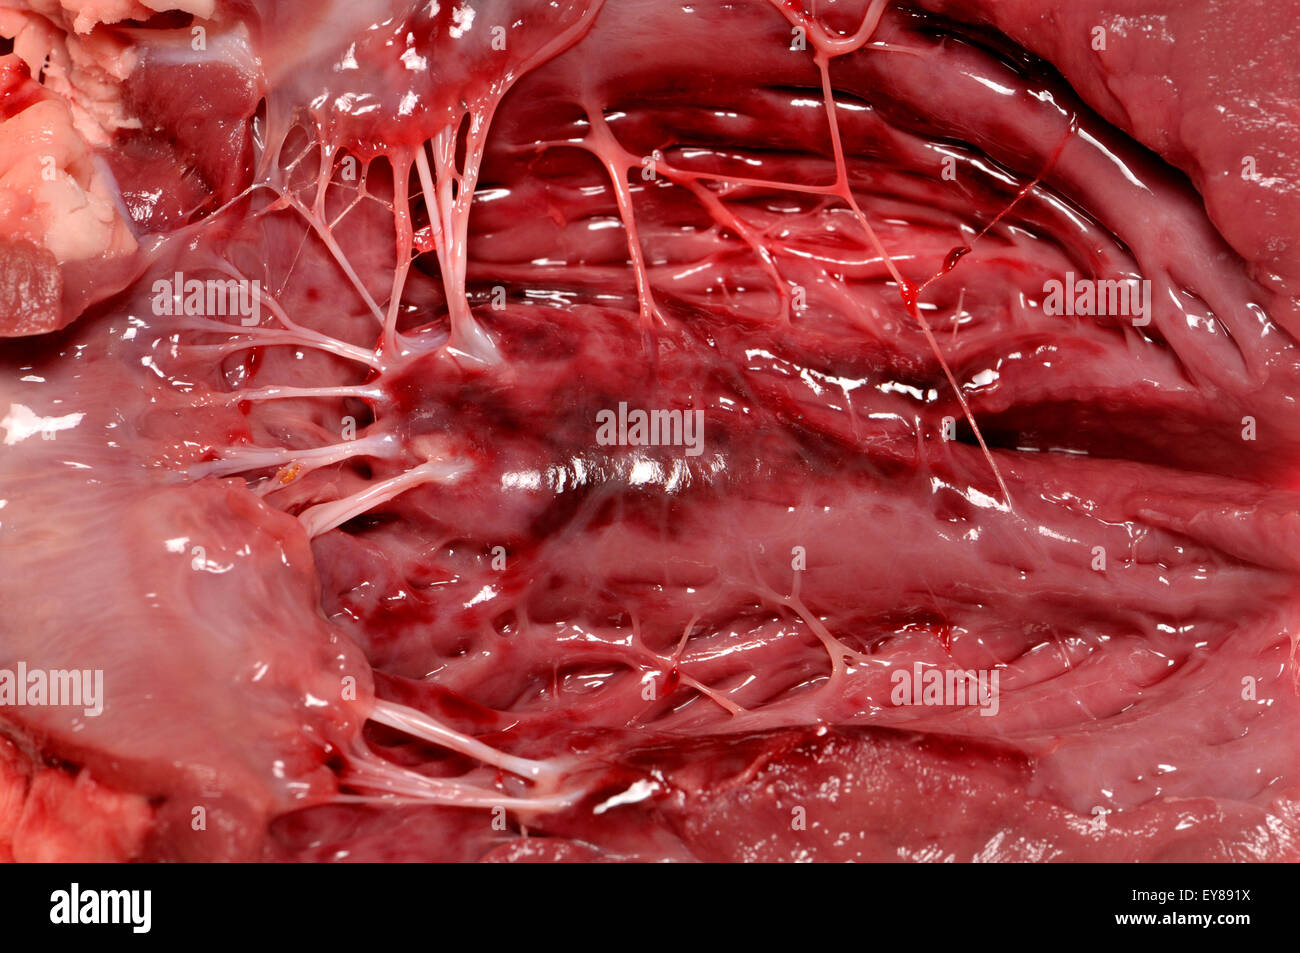 Lamb's heart bought from a supermarket. Interior showing 'heartstrings' (tendons) Stock Photo